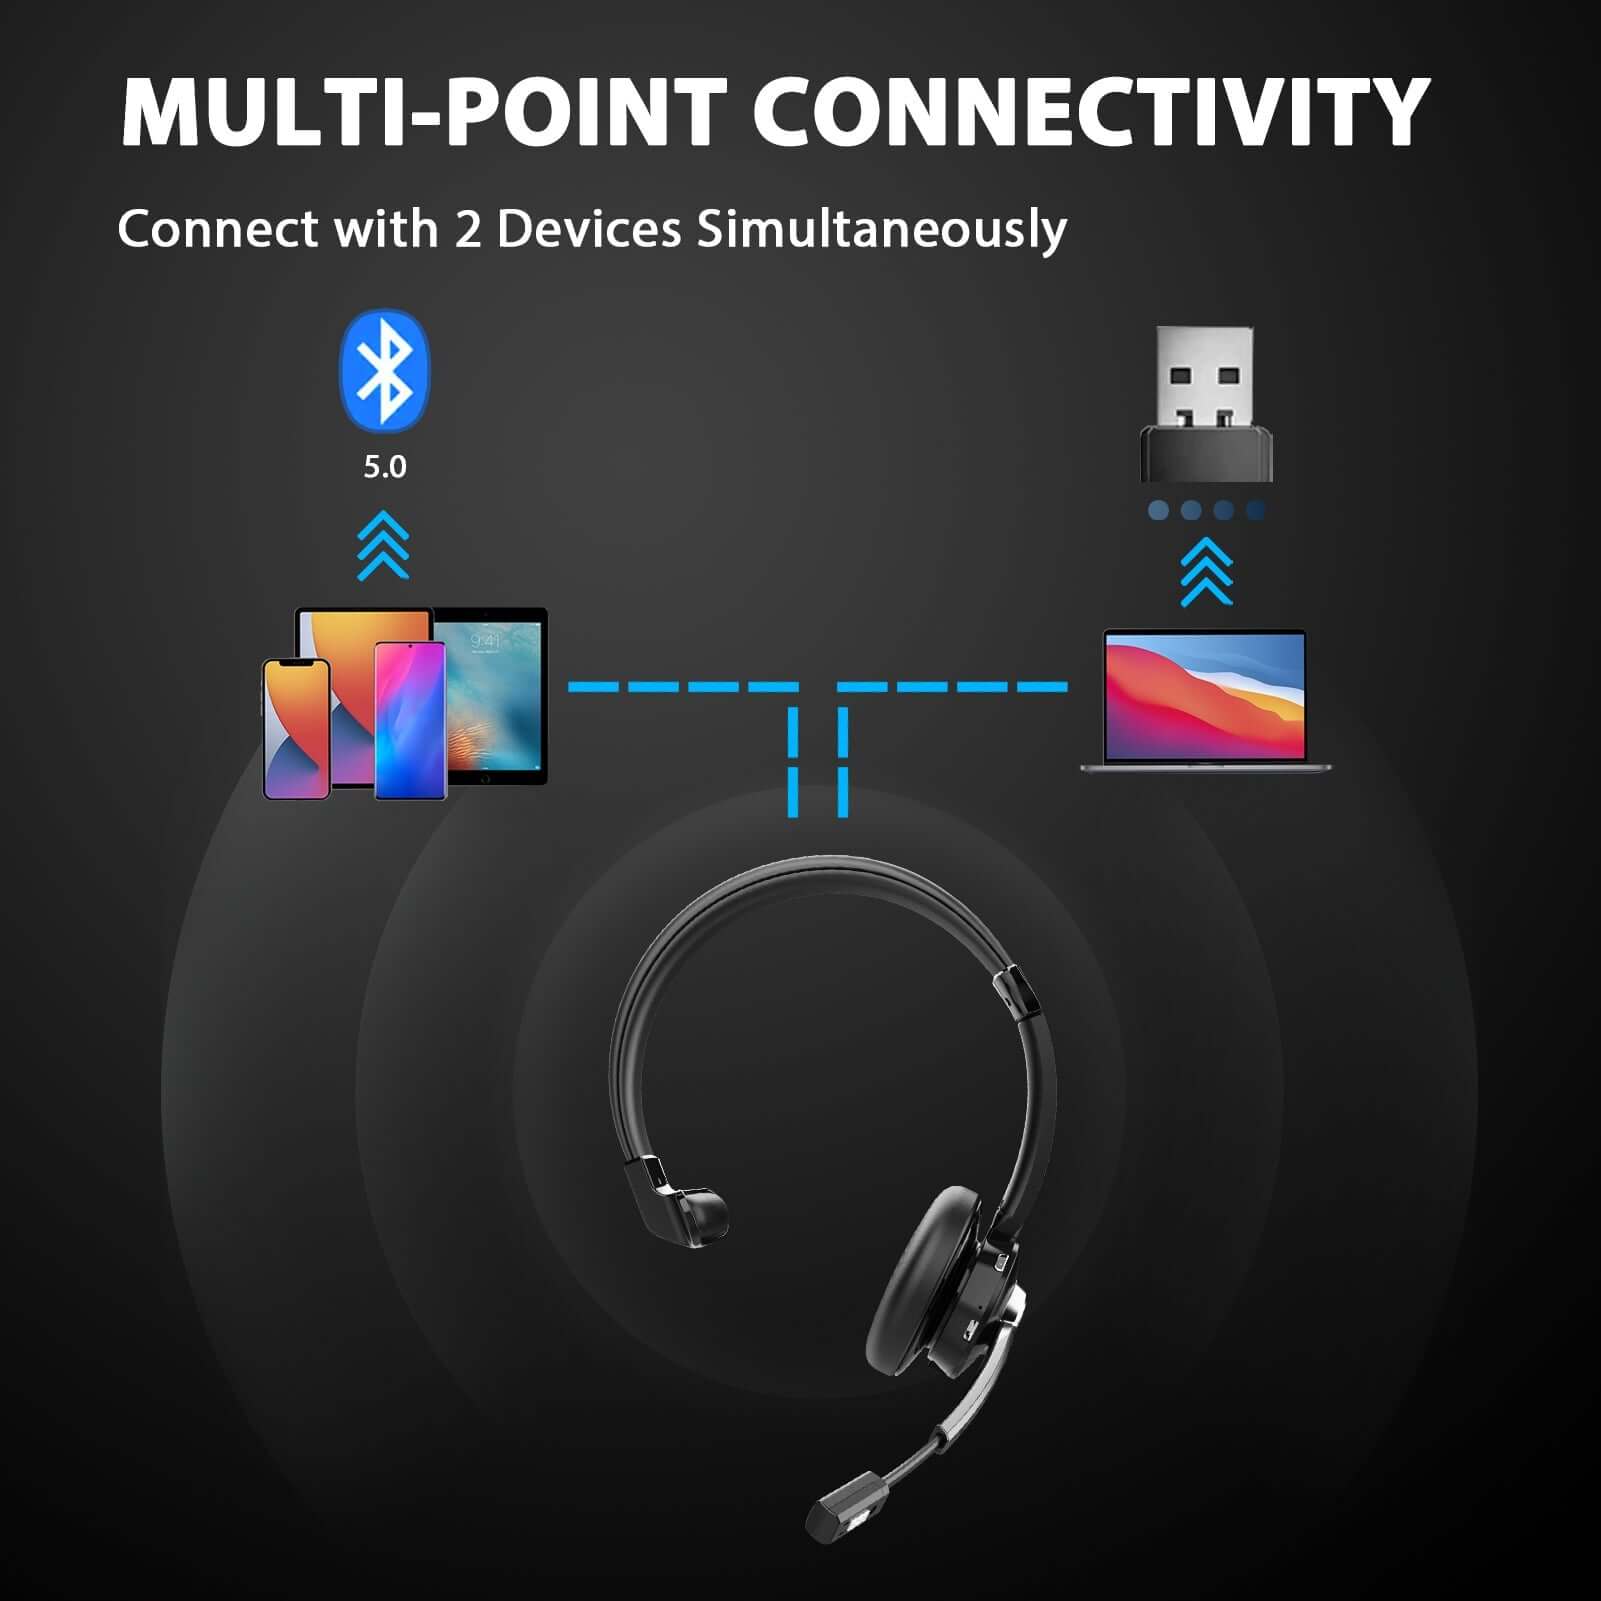 Multi-Point Connectivity,Connect with 2 devices simultaneously.